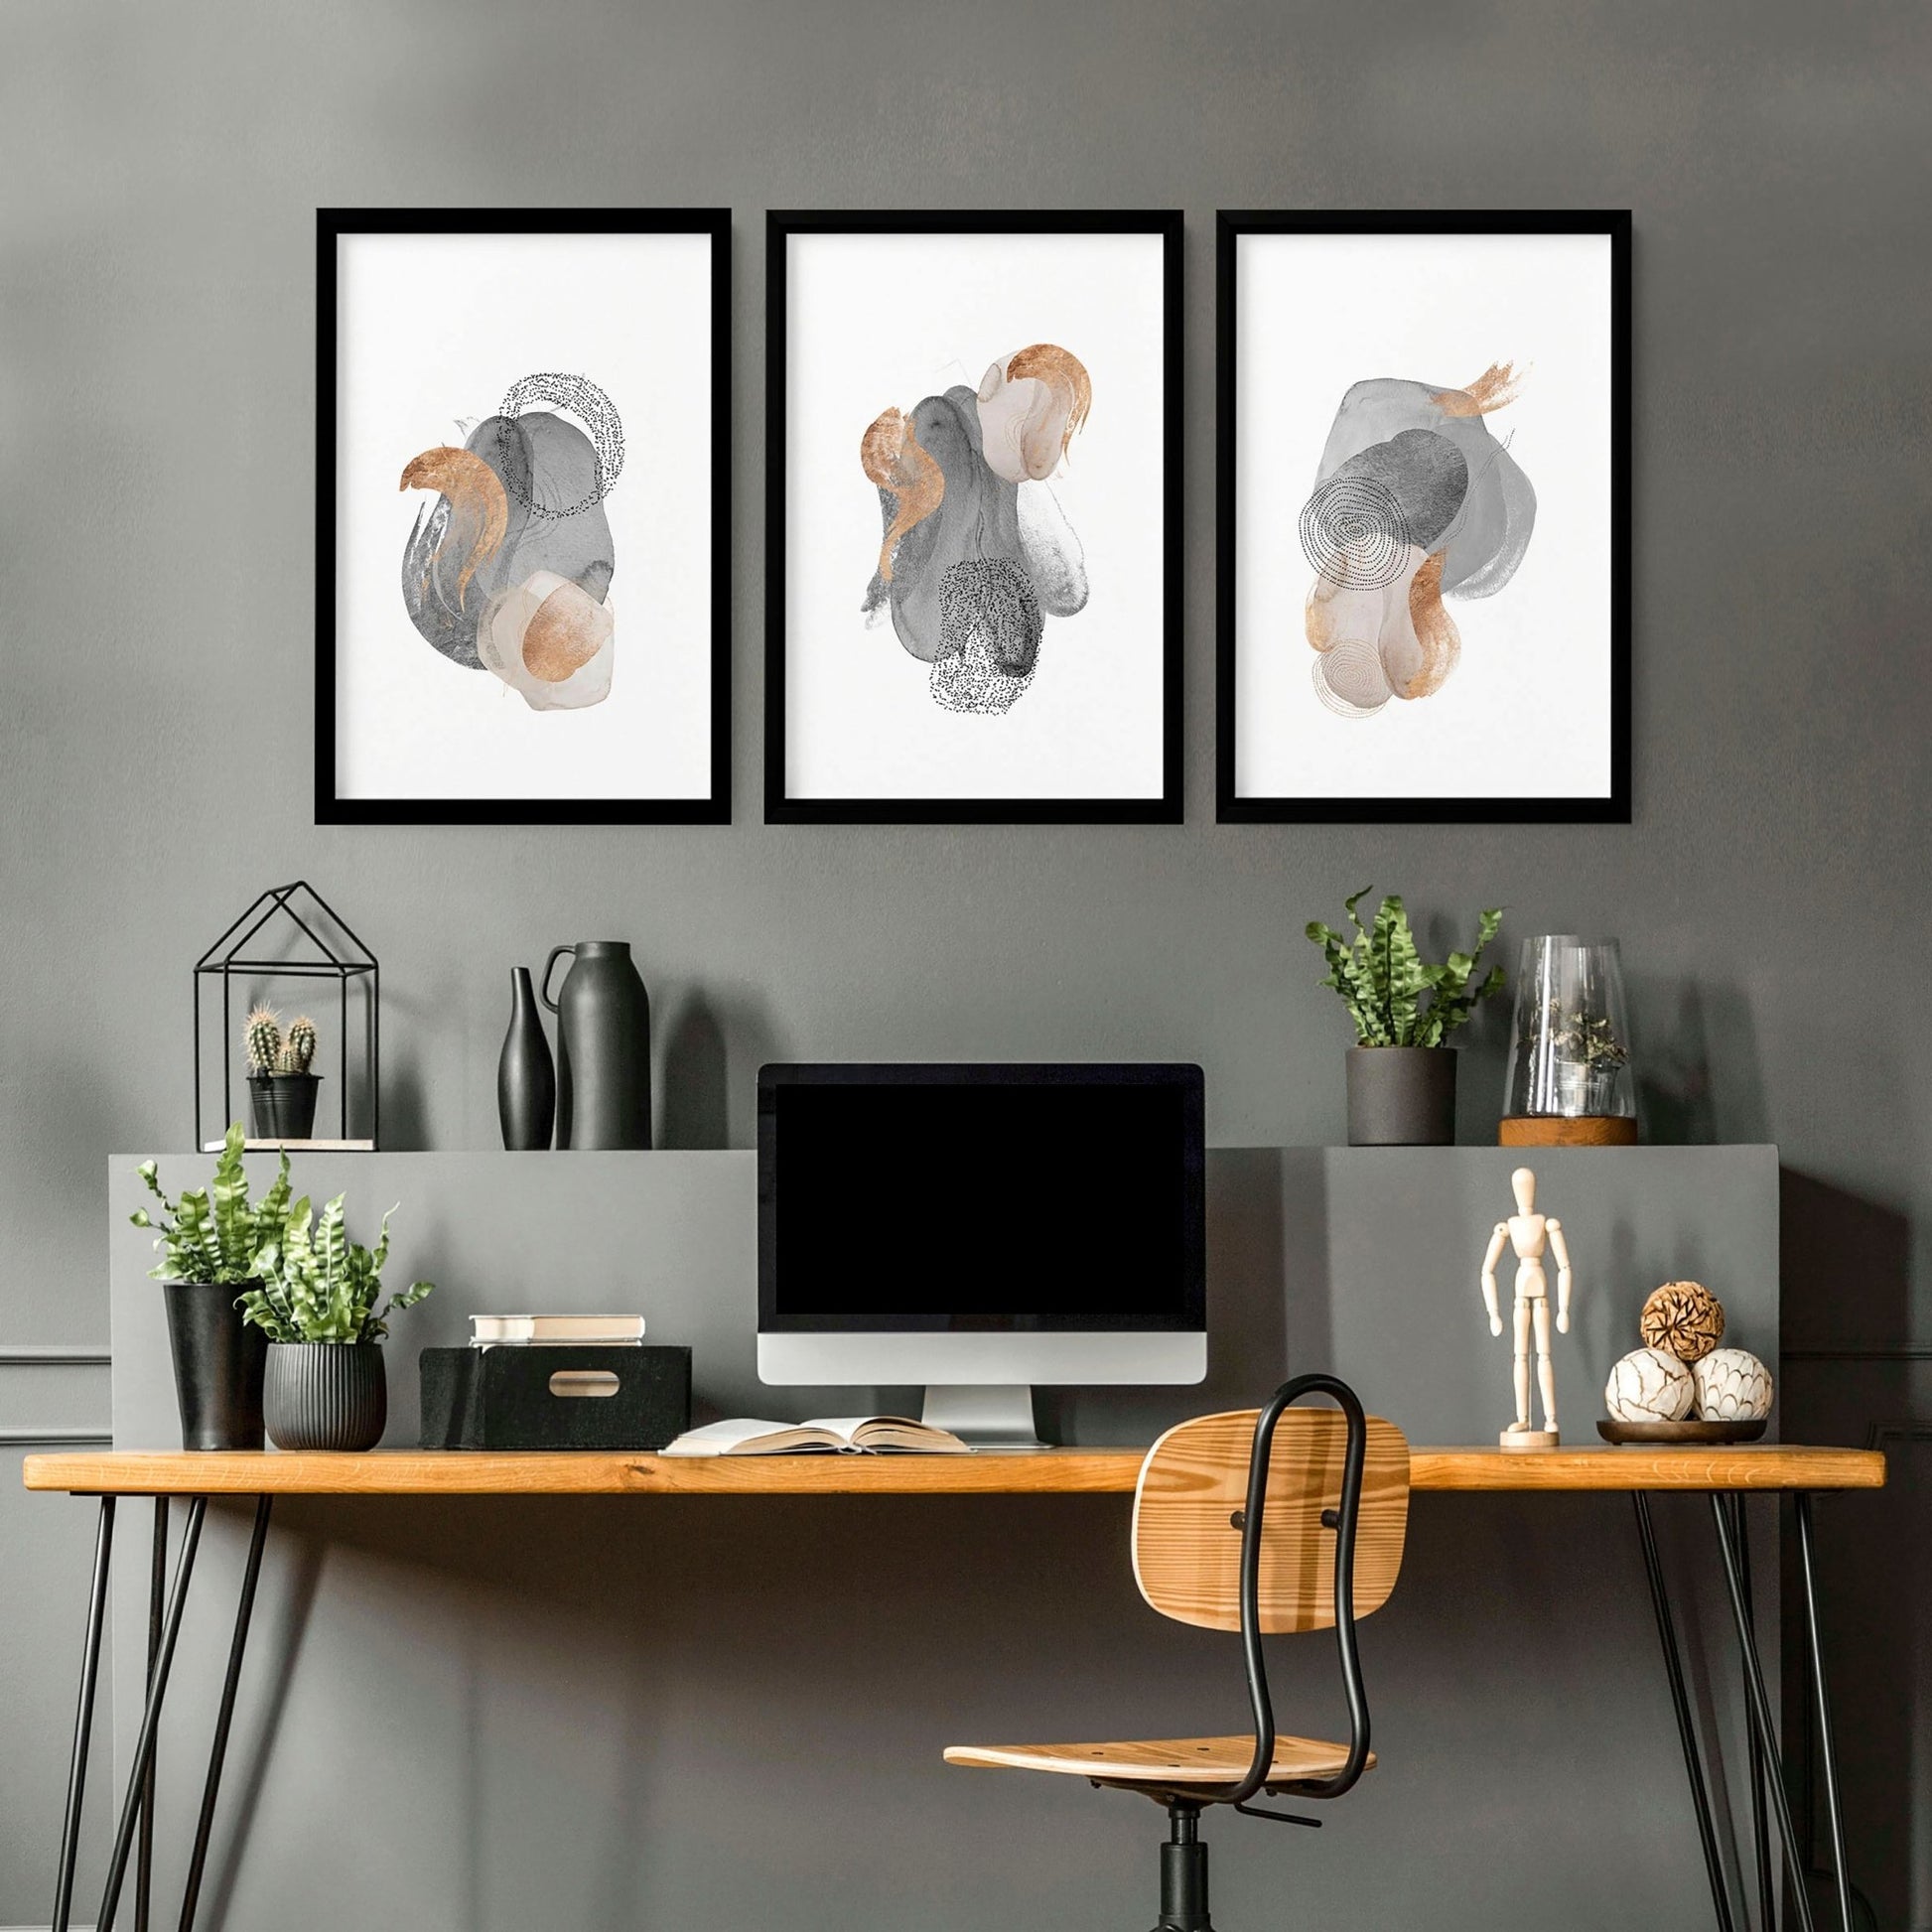 Prints for the office | set of 3 wall art prints - About Wall Art